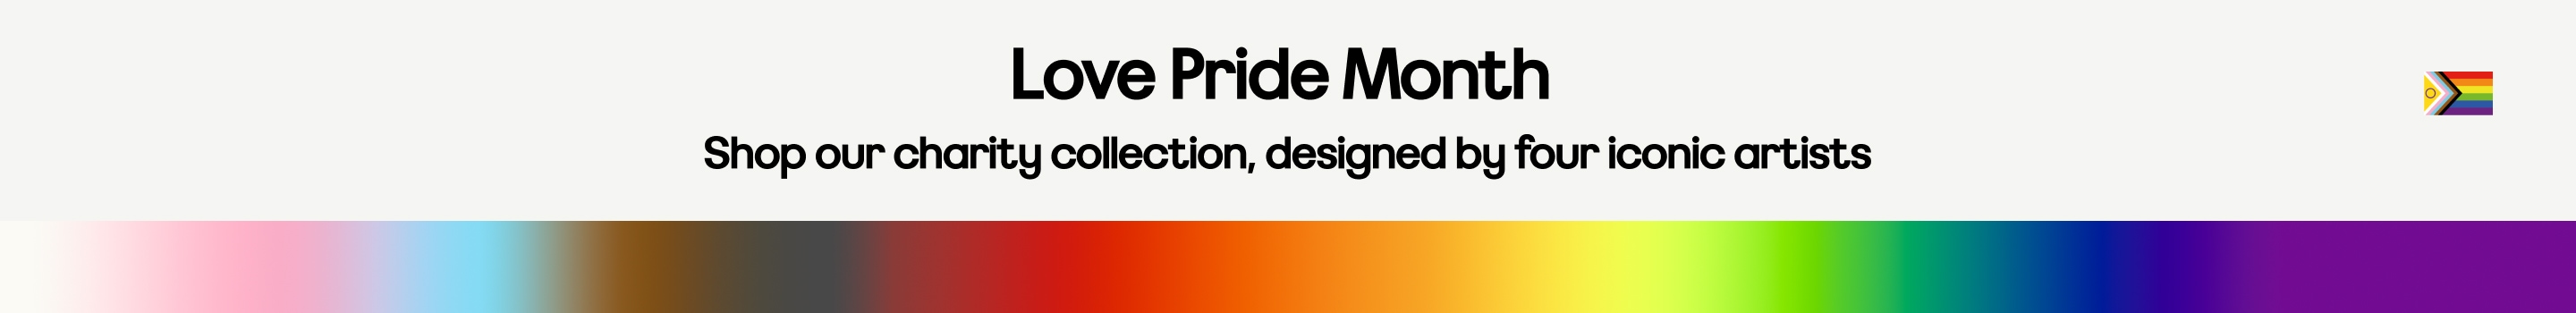 Love Pride Month Shop our charity collection, designed by four iconic artists